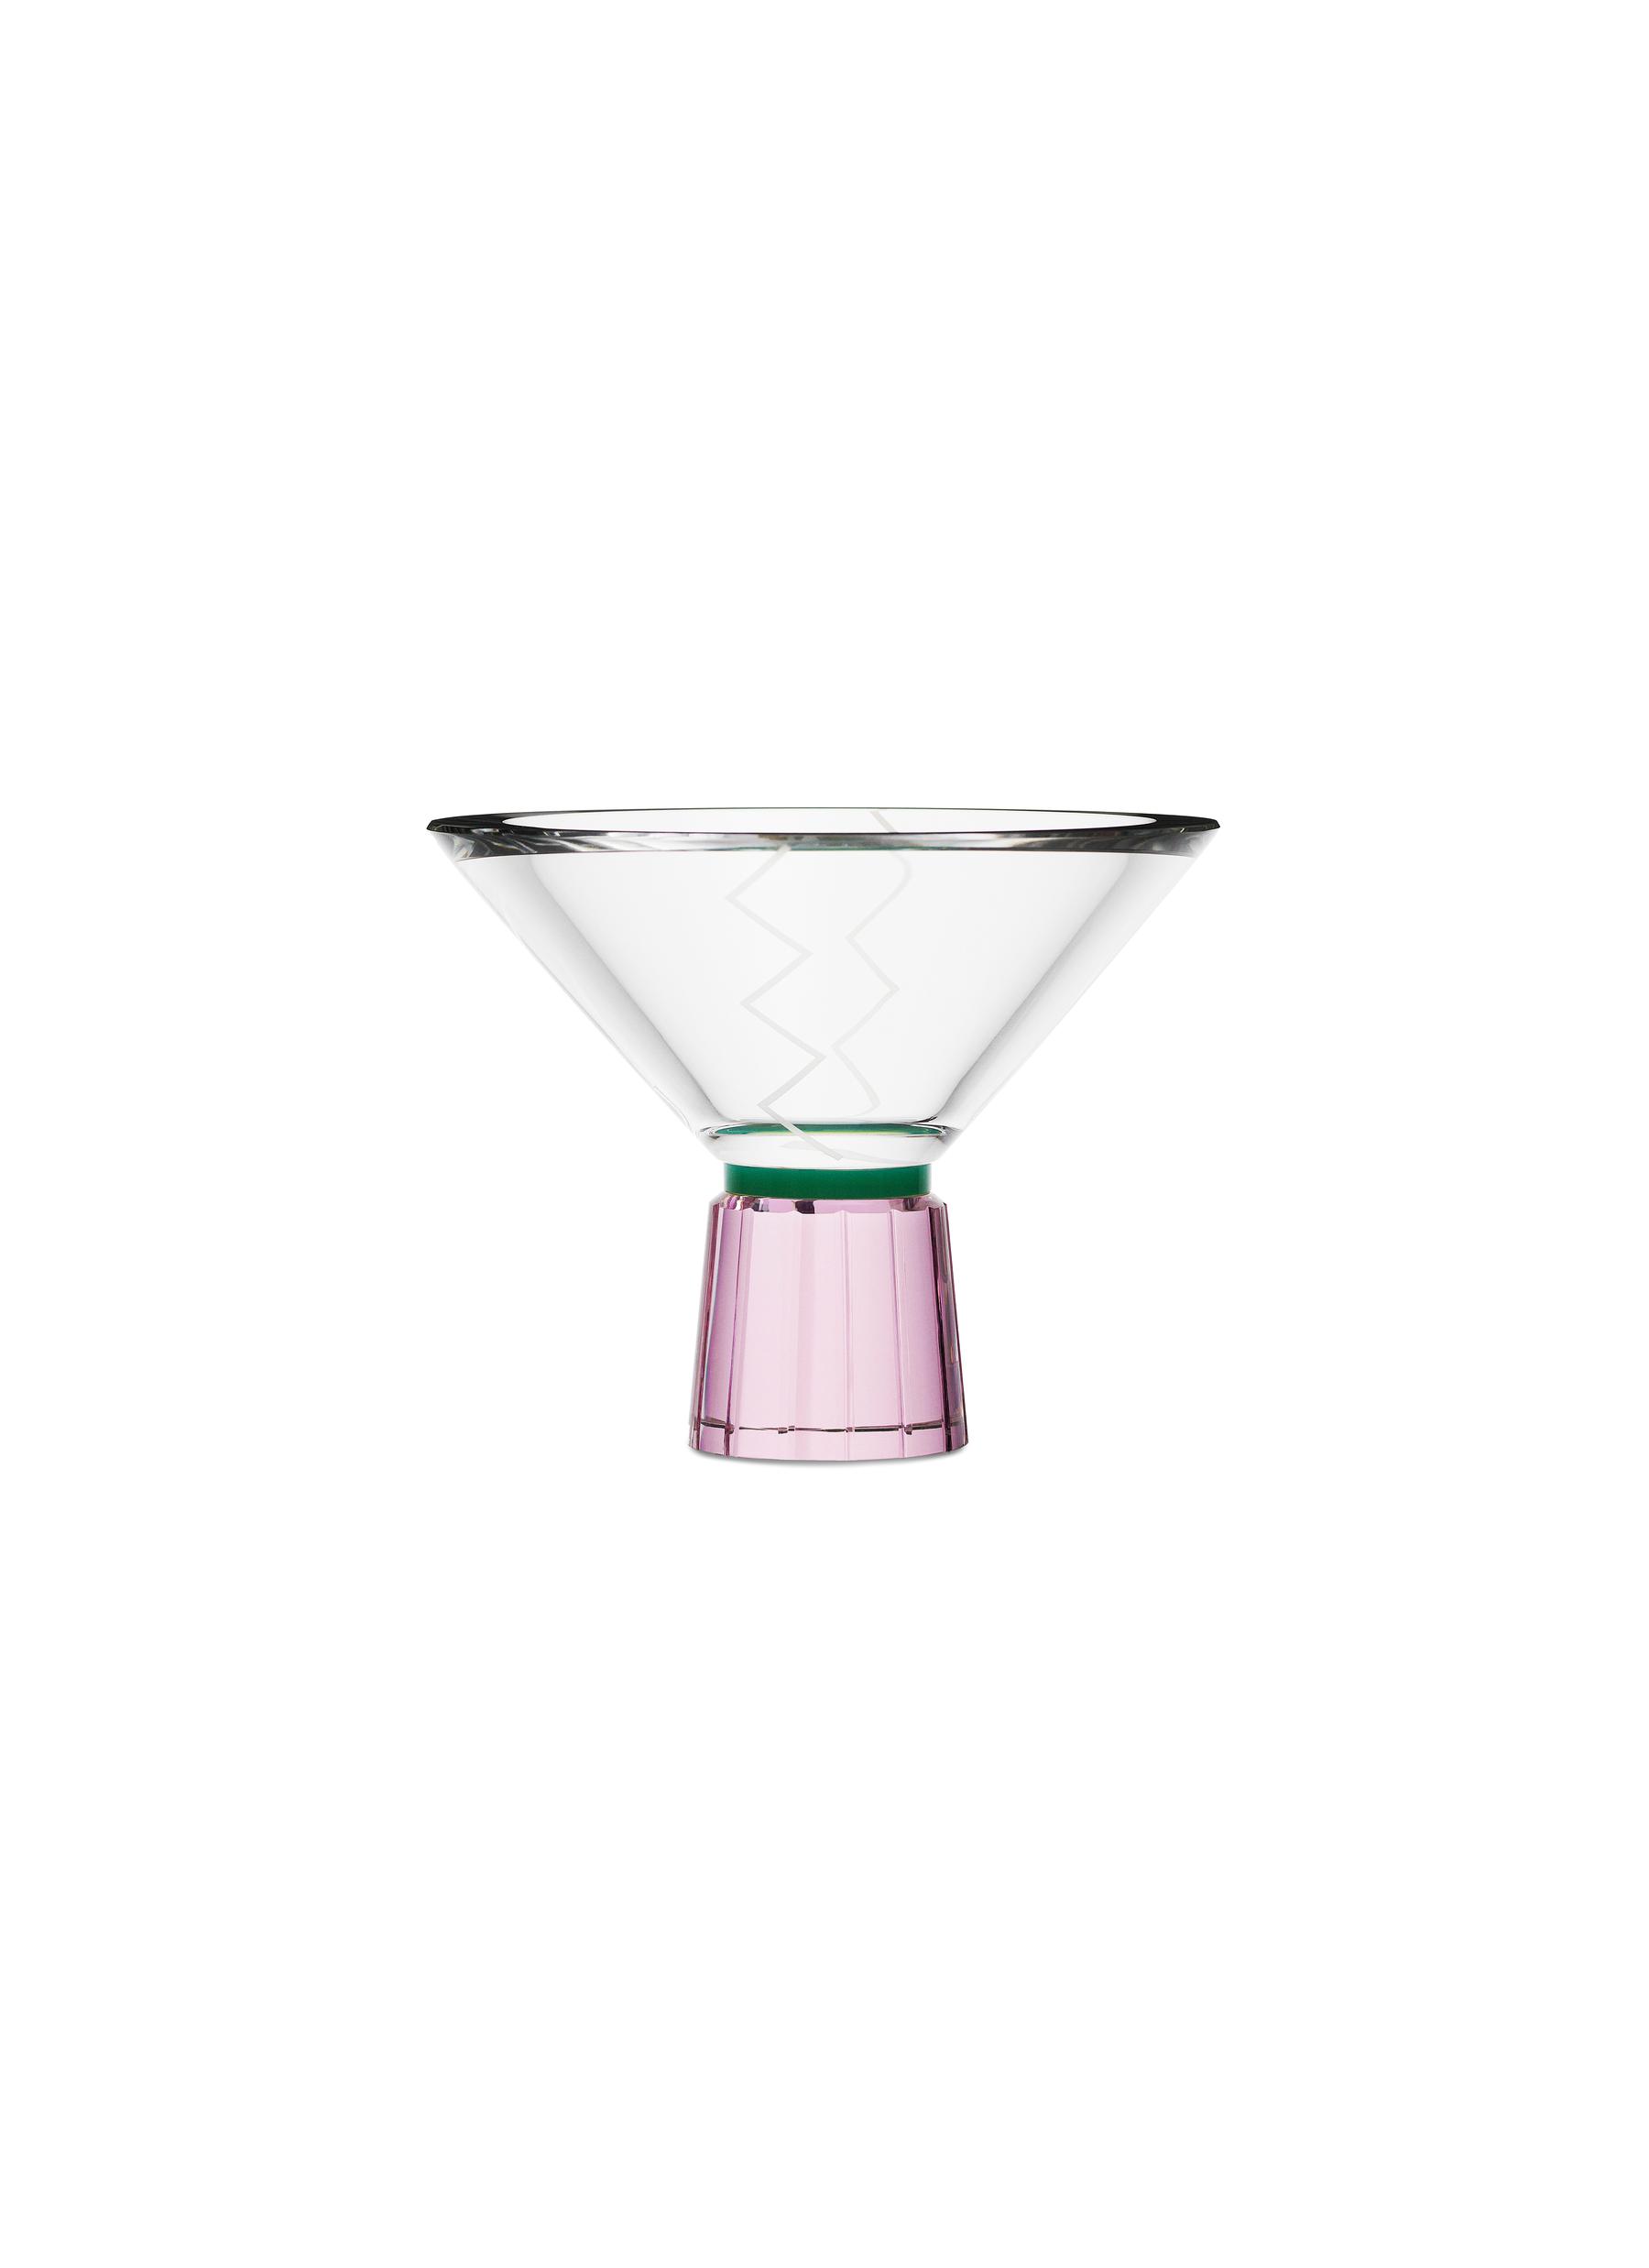 HOPE CRYSTAL BOWL - CLEAR/MINT/ROSE